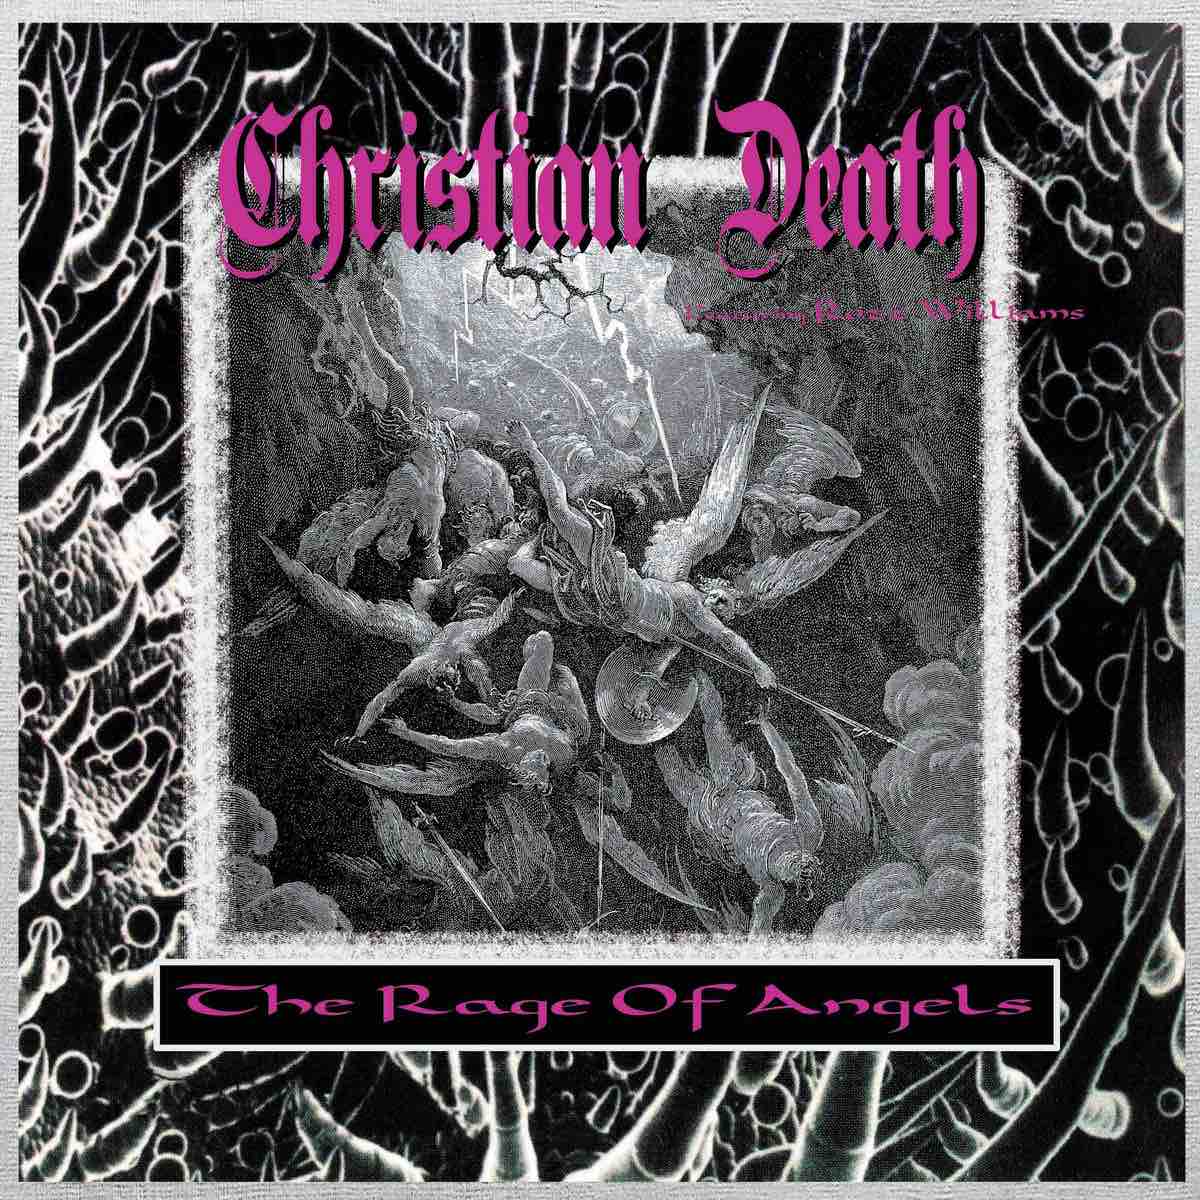 Christian Death - The Rage of Angels LP